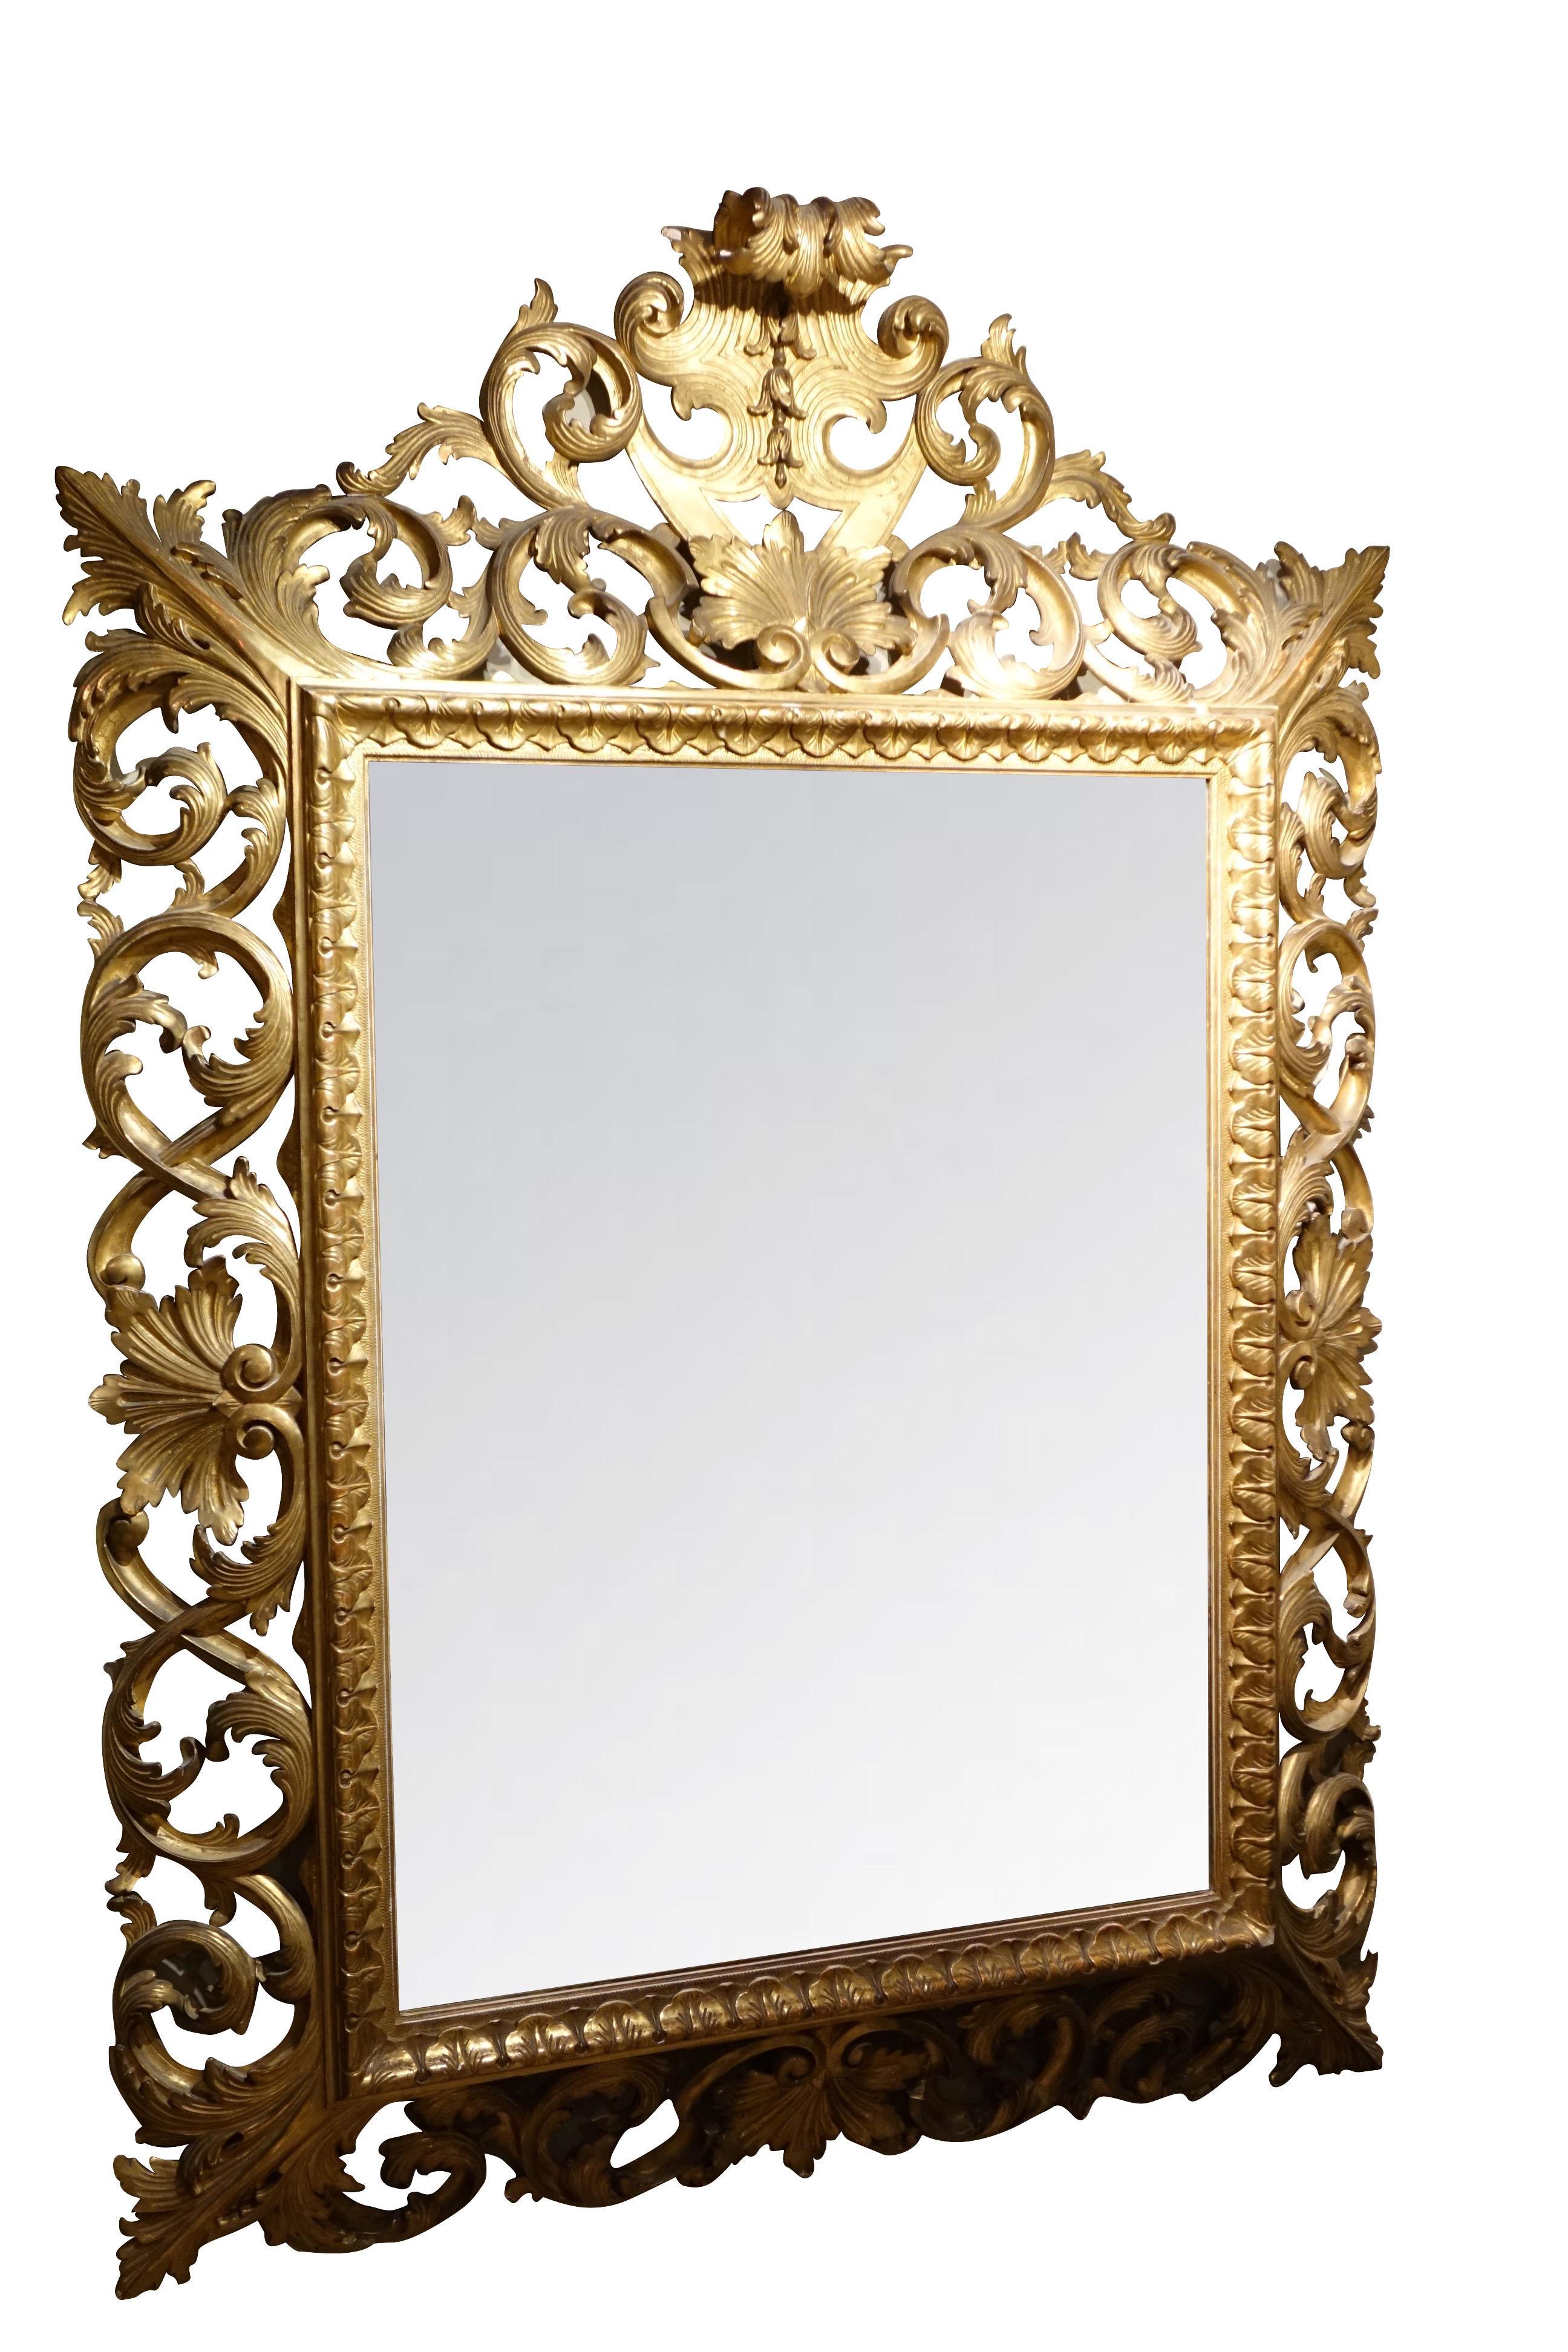 Important mirror in inverted profile, finely carved in an openwork of curls and foliated foliage scrolls.
Gilt wood with original gilt leaf, original central beveled mirror, good general condition.
Italy, Tuscany(?) ,19th century